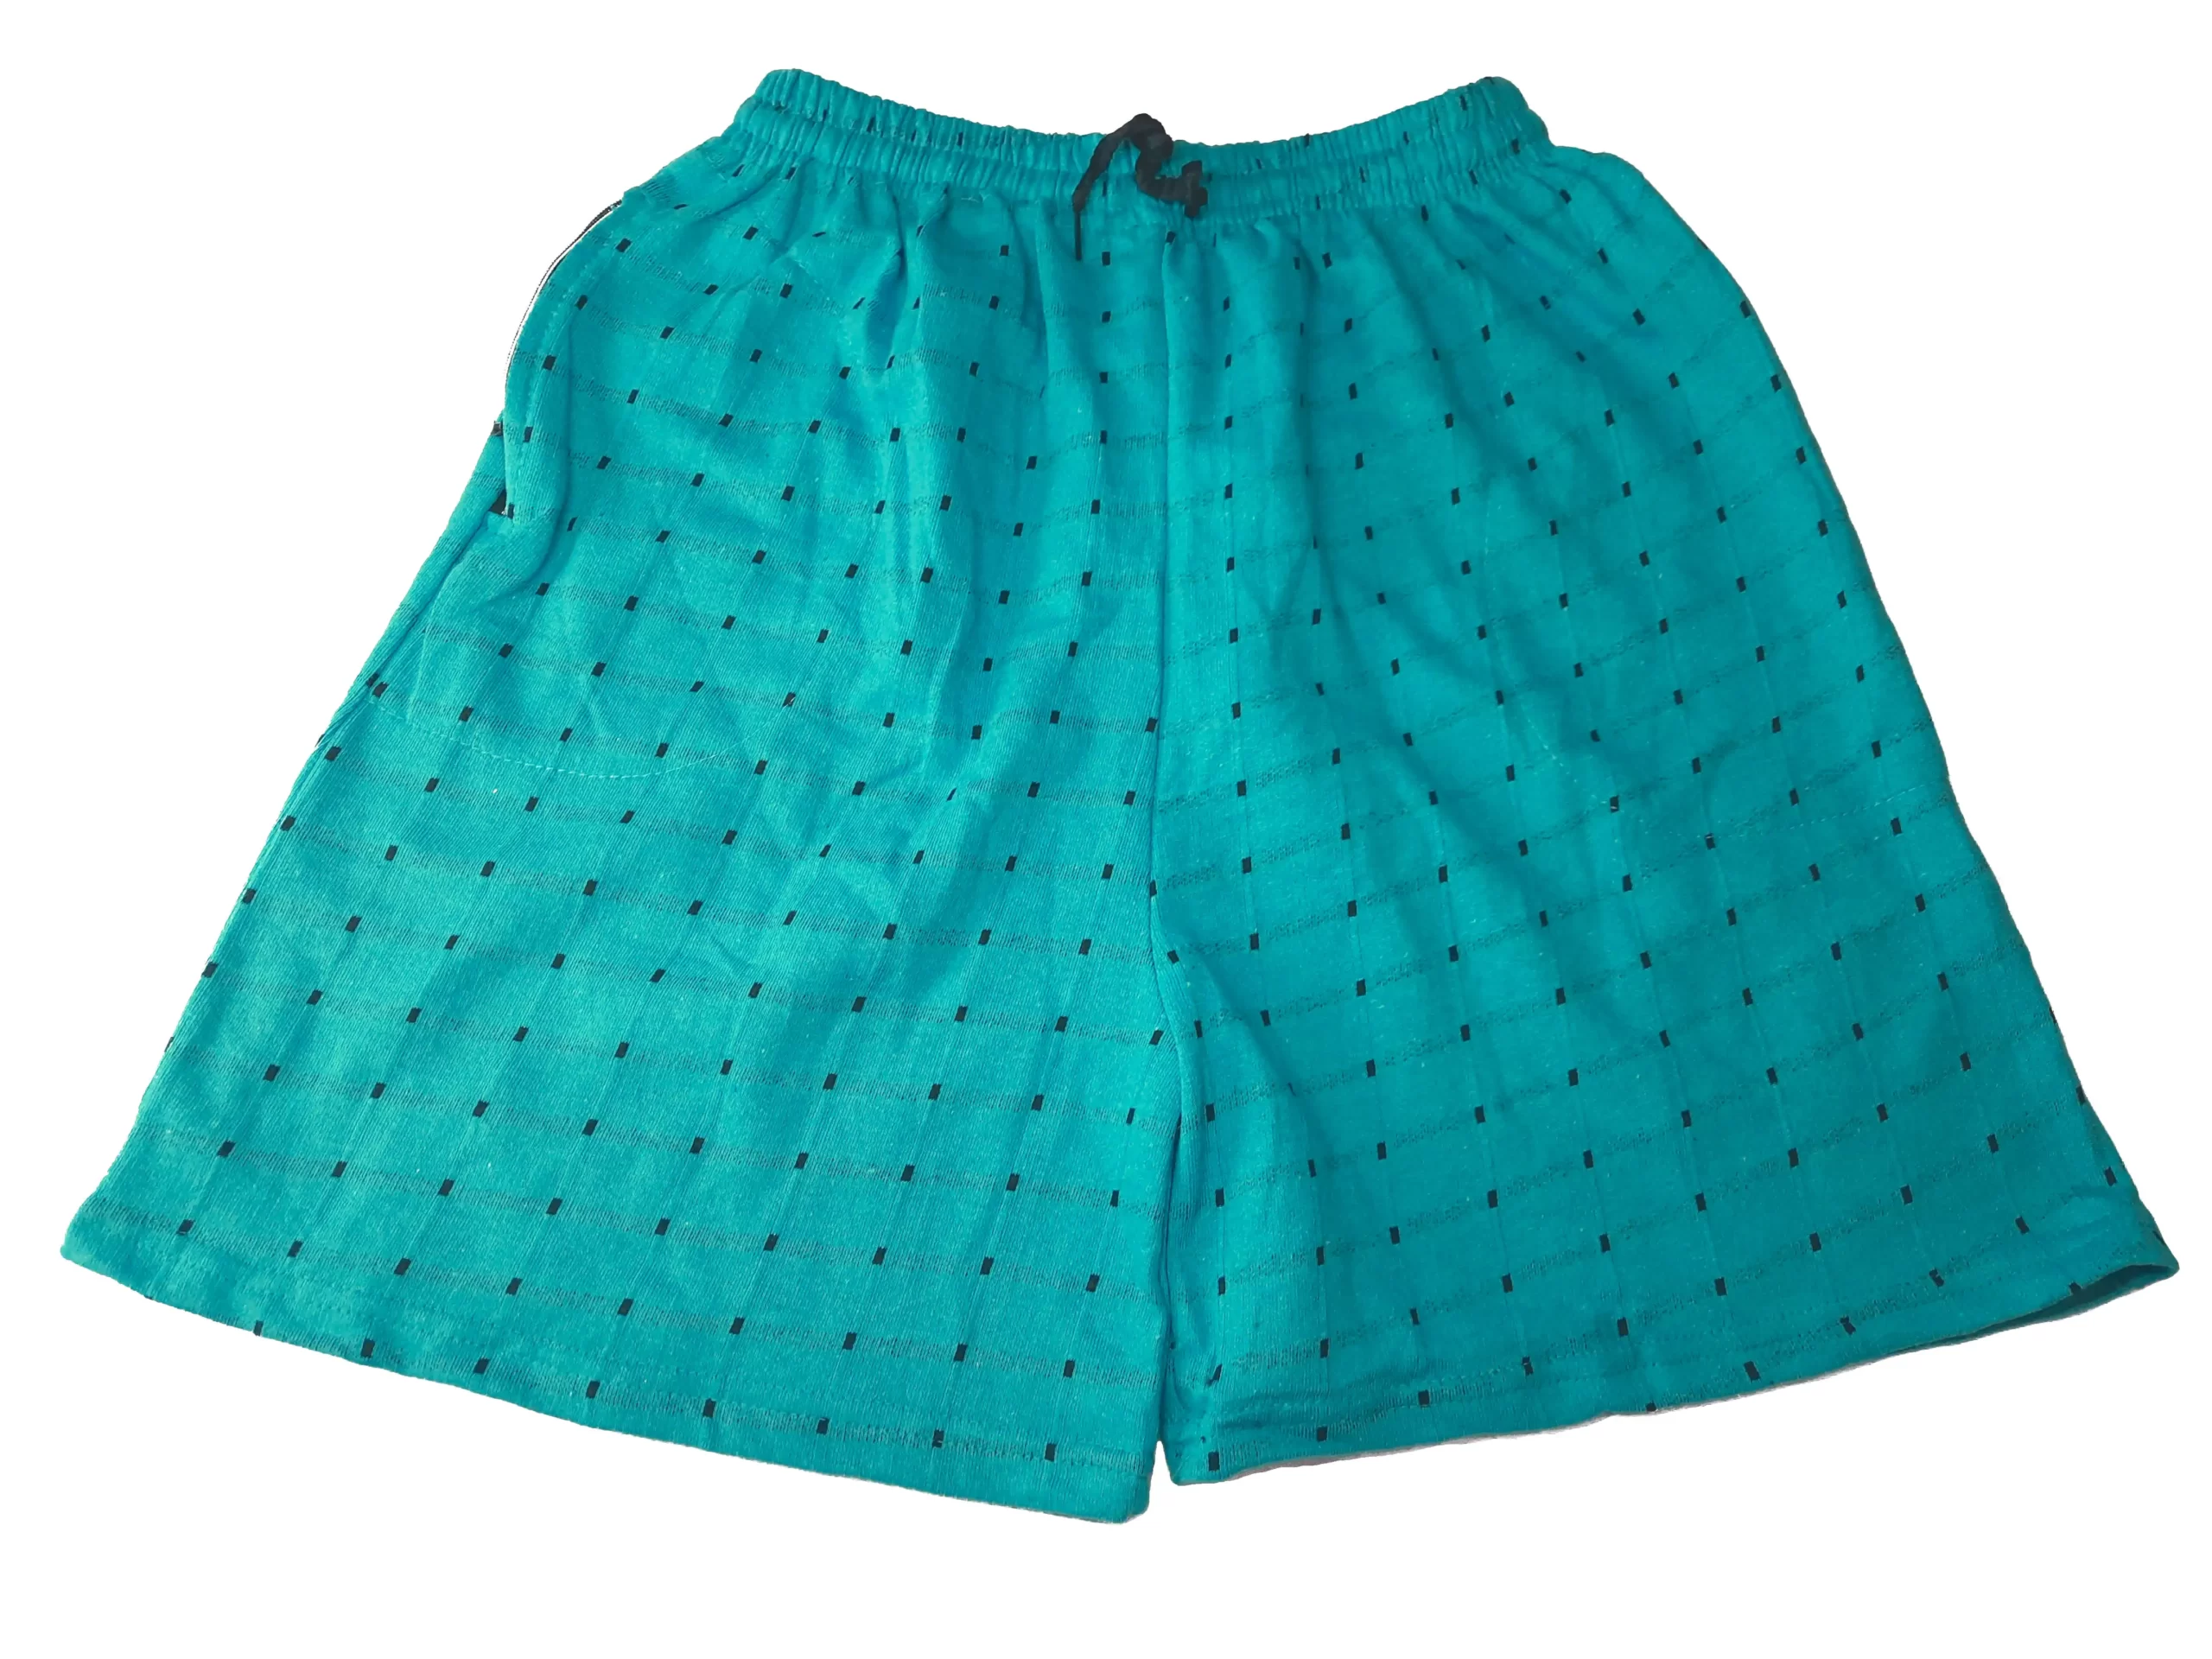 Latest Mens Shorts Design S0001 Only in Rs 199